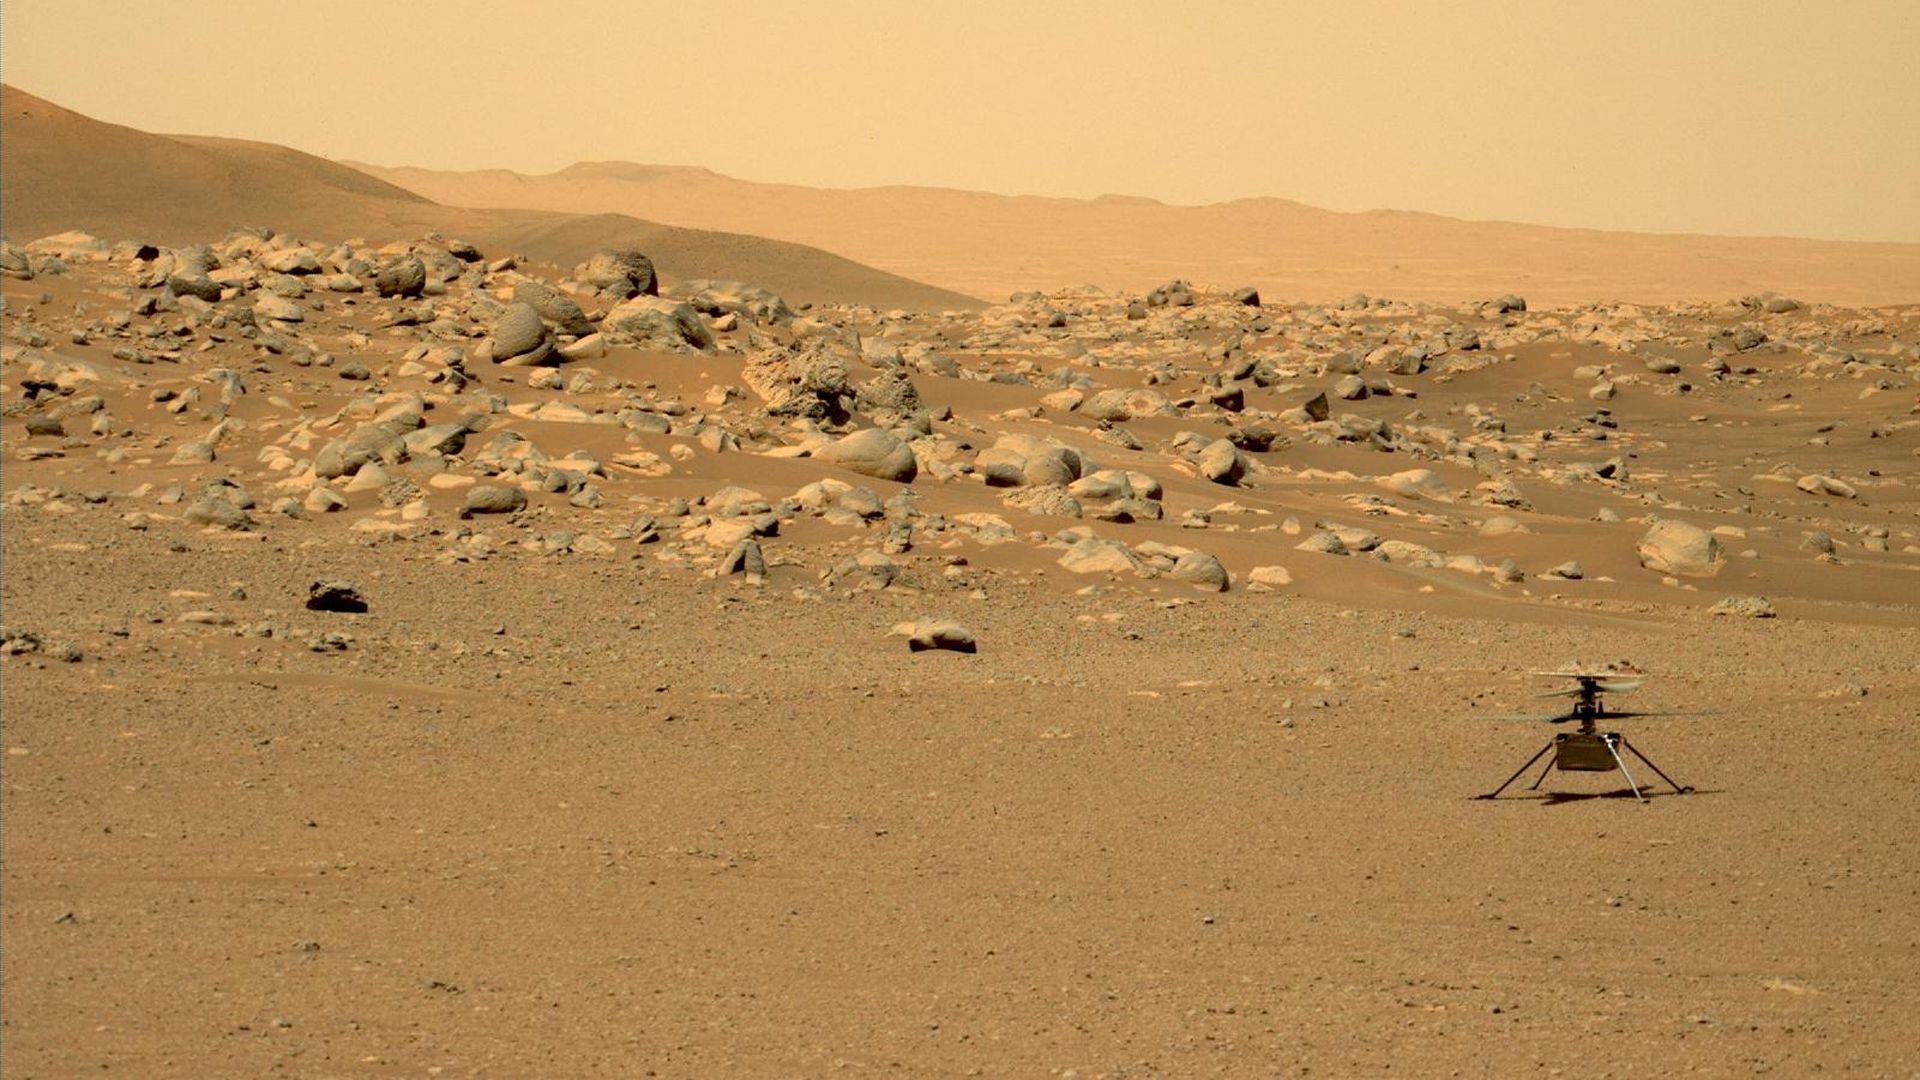 Ingenuity on the surface of Mars with boulders in the background